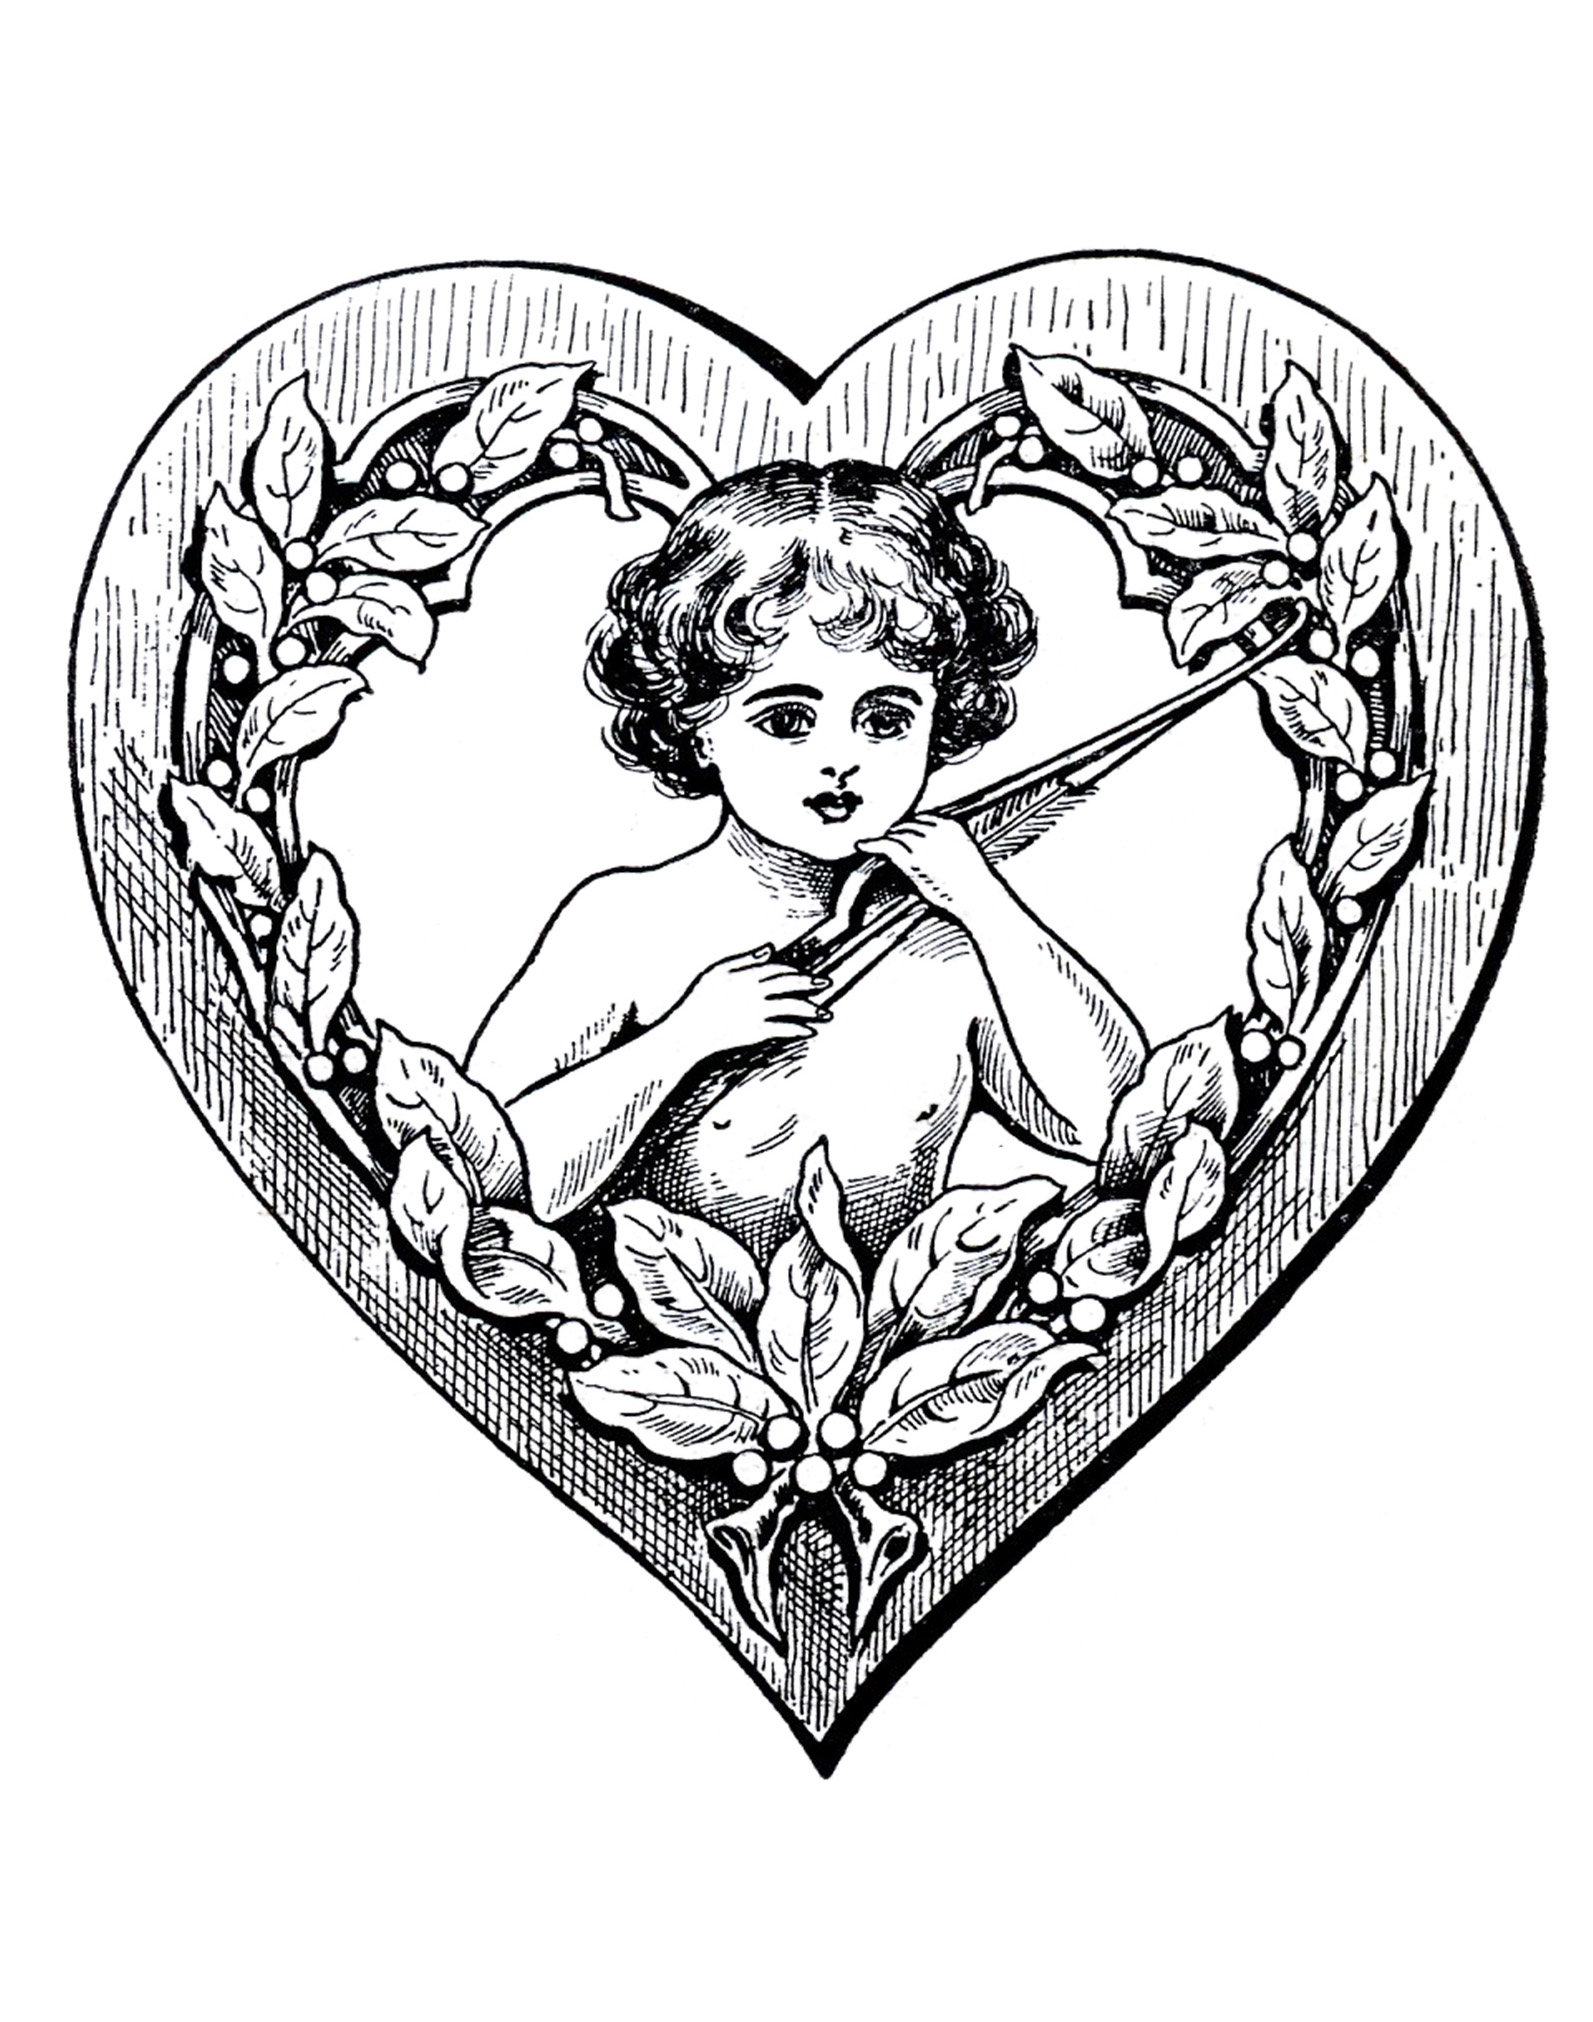 Vintage Love drawing : Cupidon in an Heart